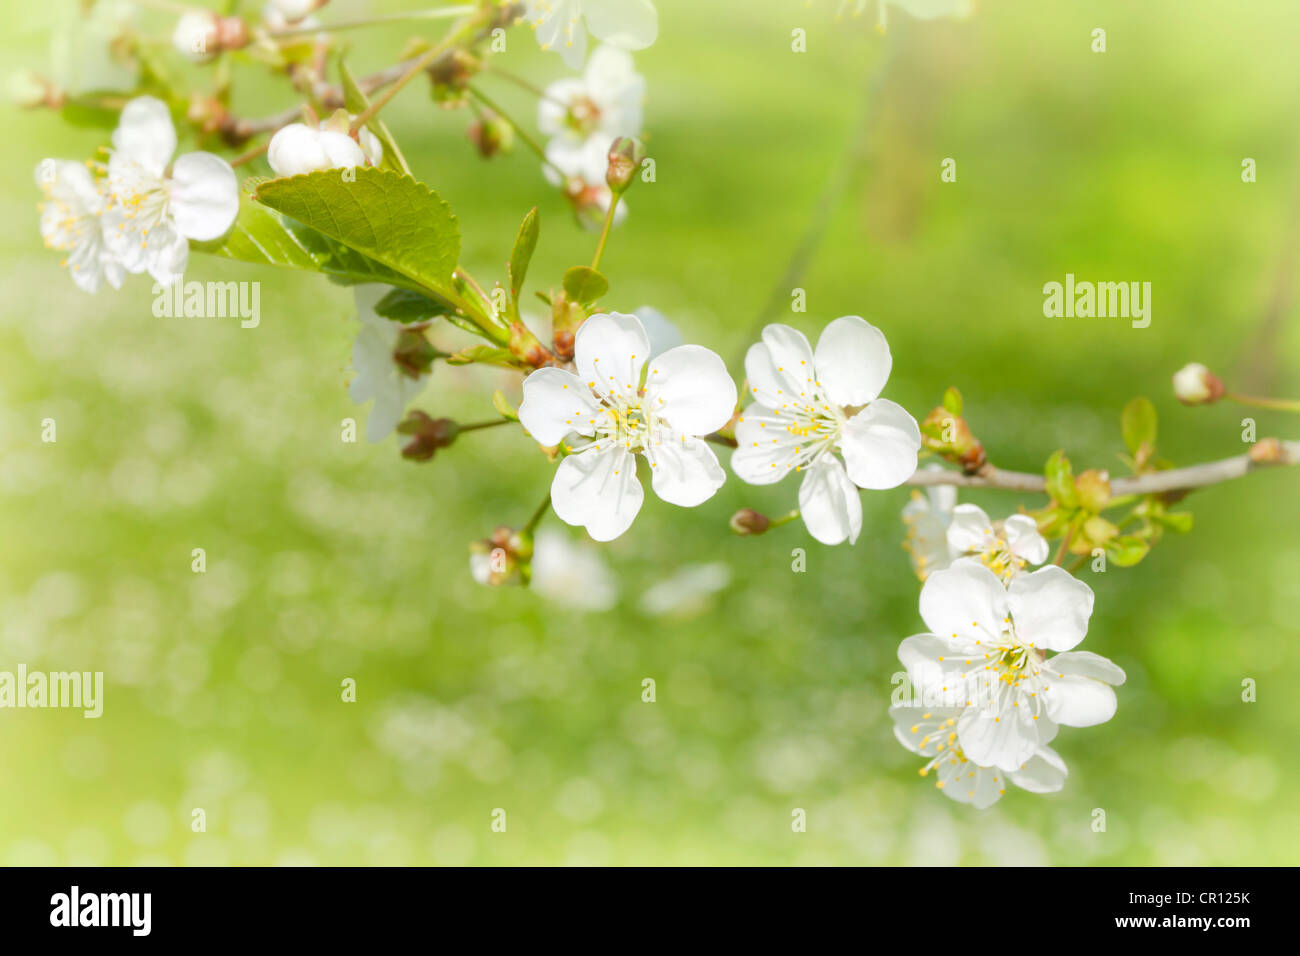 Apple blossom on the tree in the garden abstract spring floral background Stock Photo